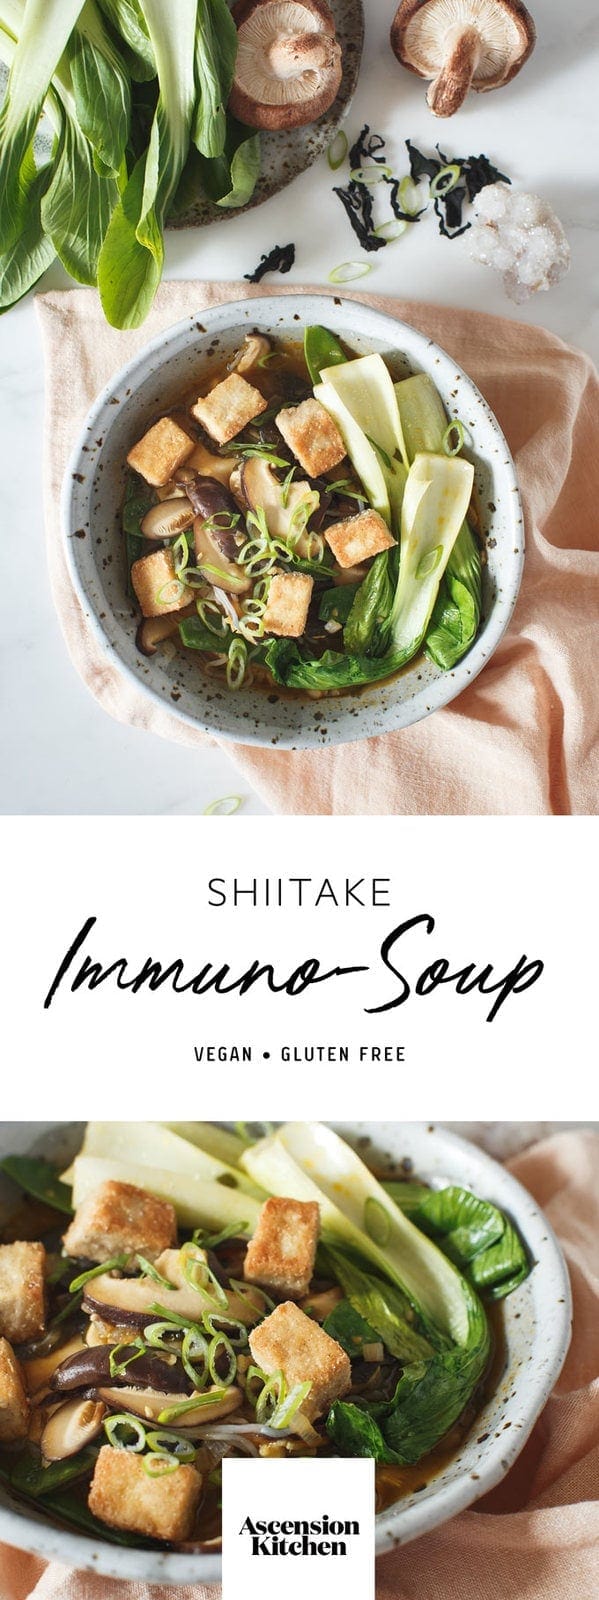 A nourishing Shiitake Mushroom Soup full of immune supportive nutrients. #shiitakesoup #shiitakesouprecipe #immunesoup #shiitakemushroom #shiitakemushroomsoup #veganmushroomsouprecipe #AscensionKitchen  // Pin to your own inspiration board! //